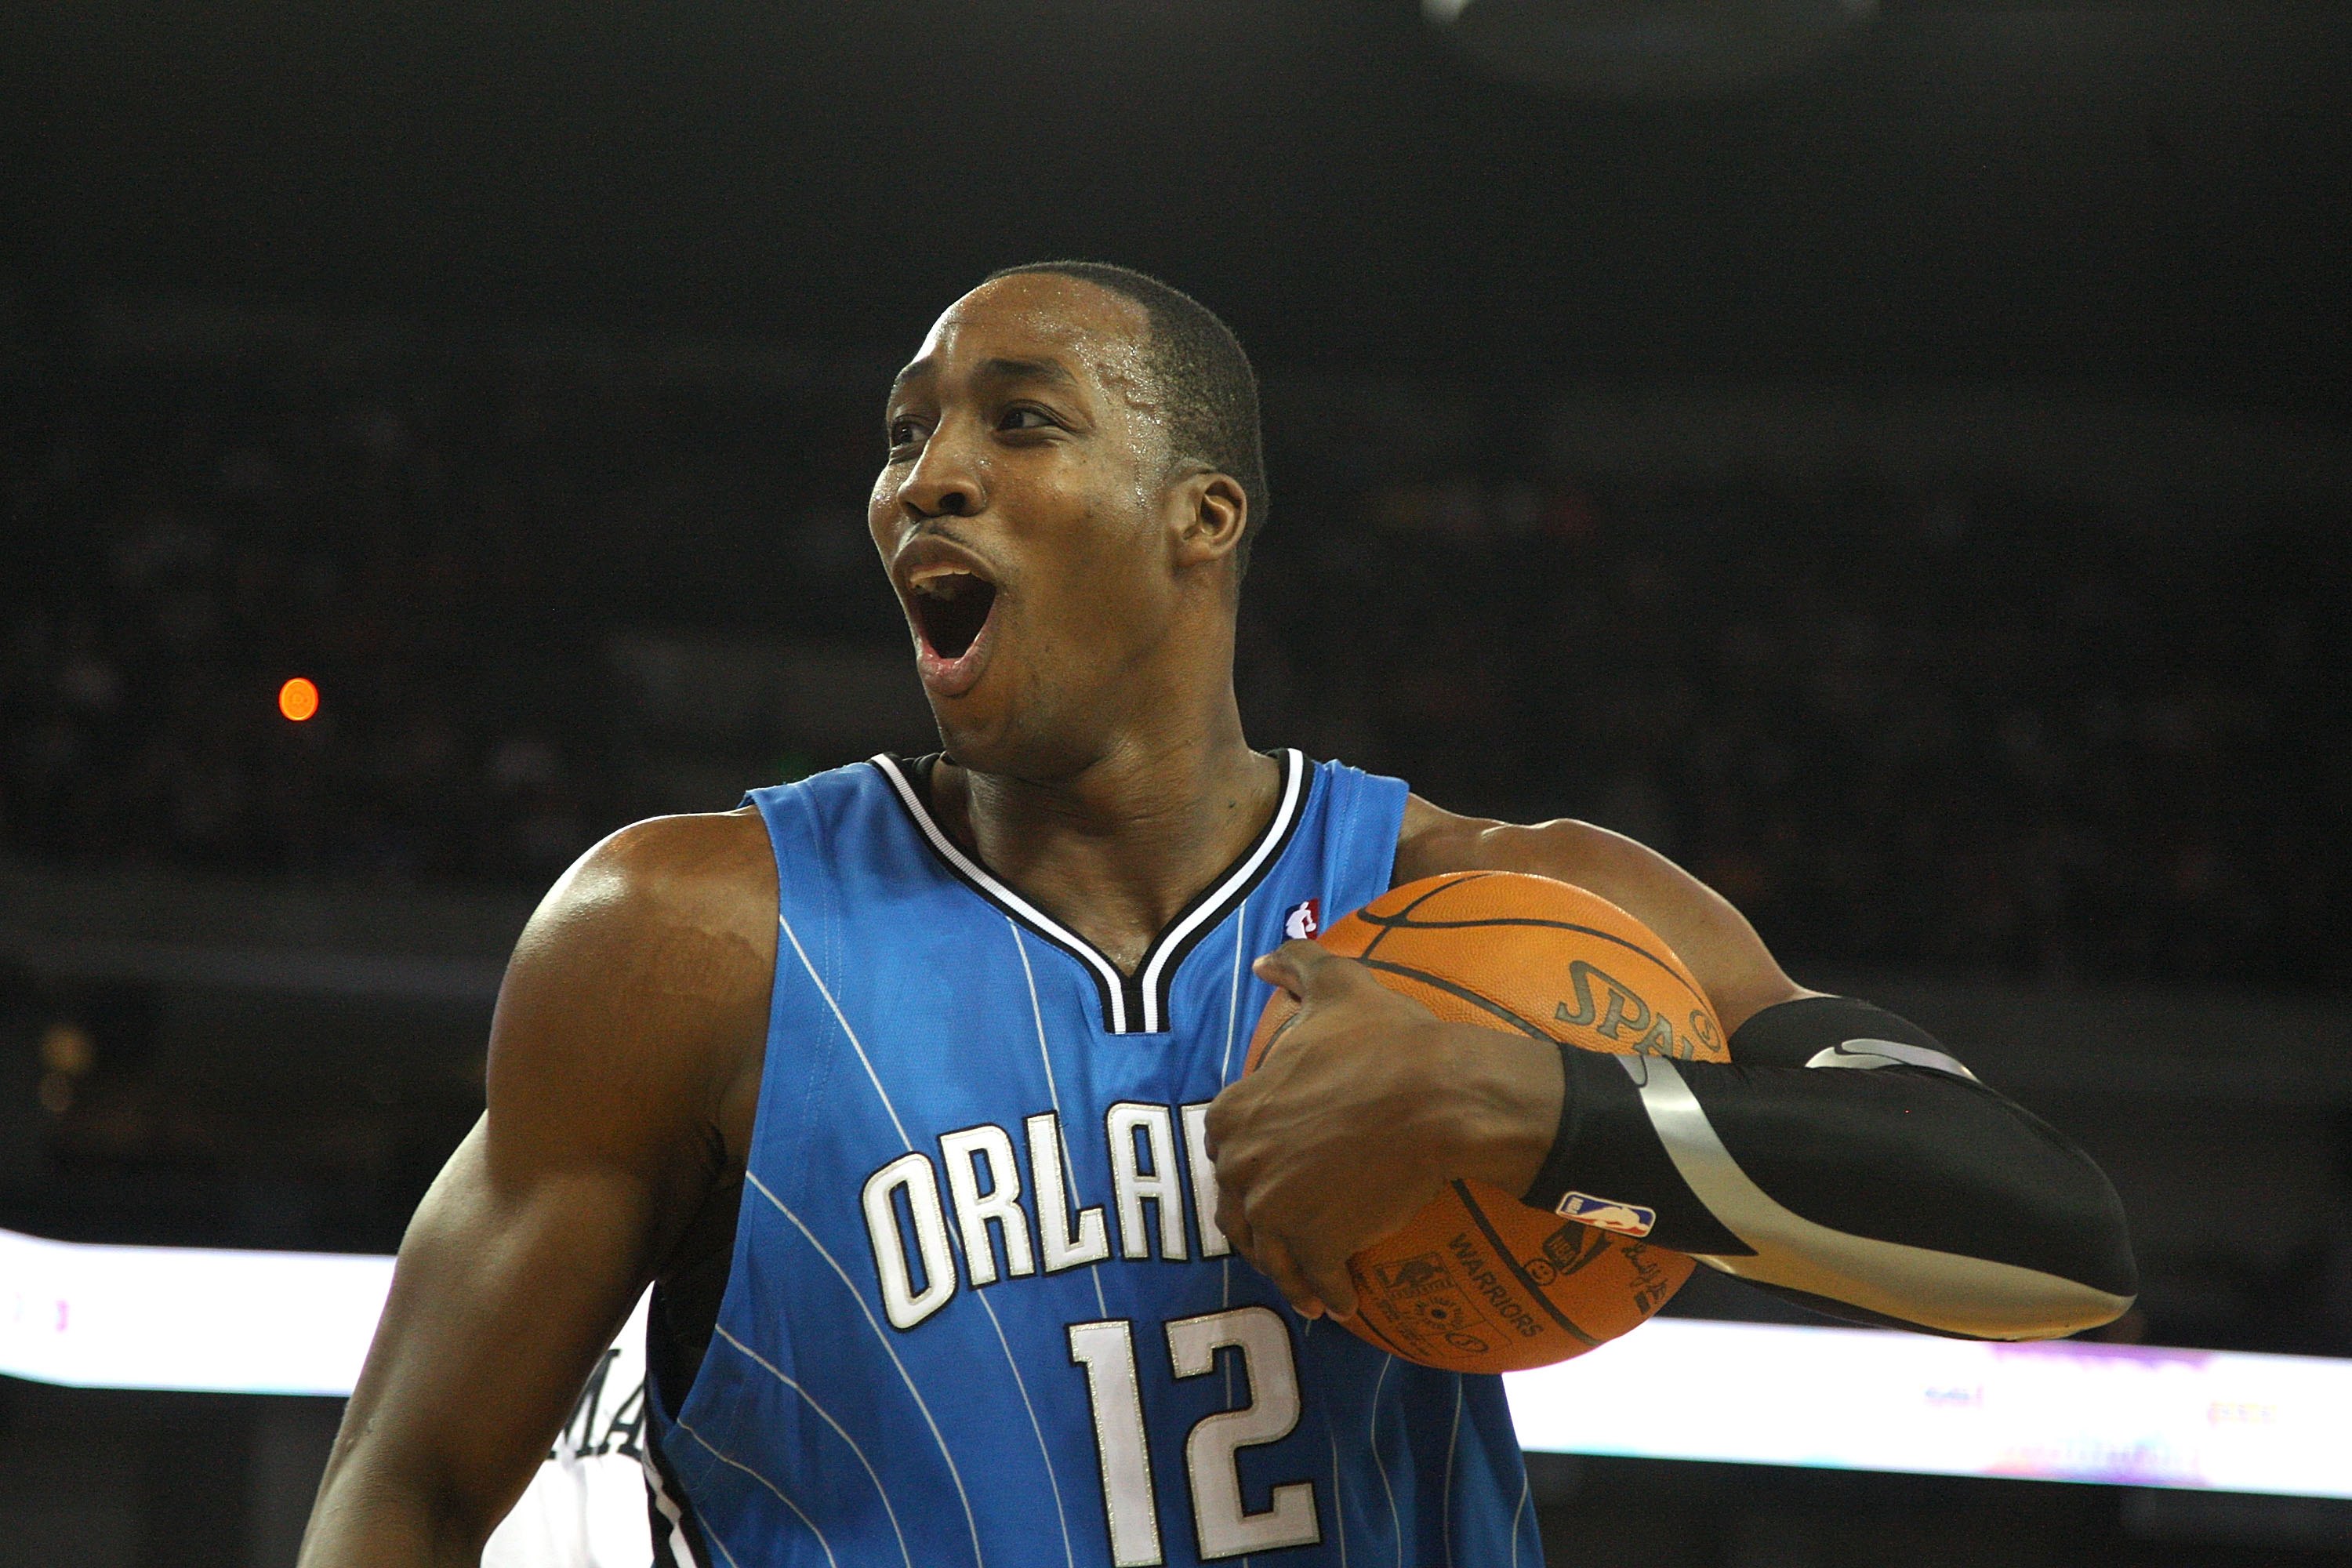 Dwight Howard was a superstar with the Orlando Magic.